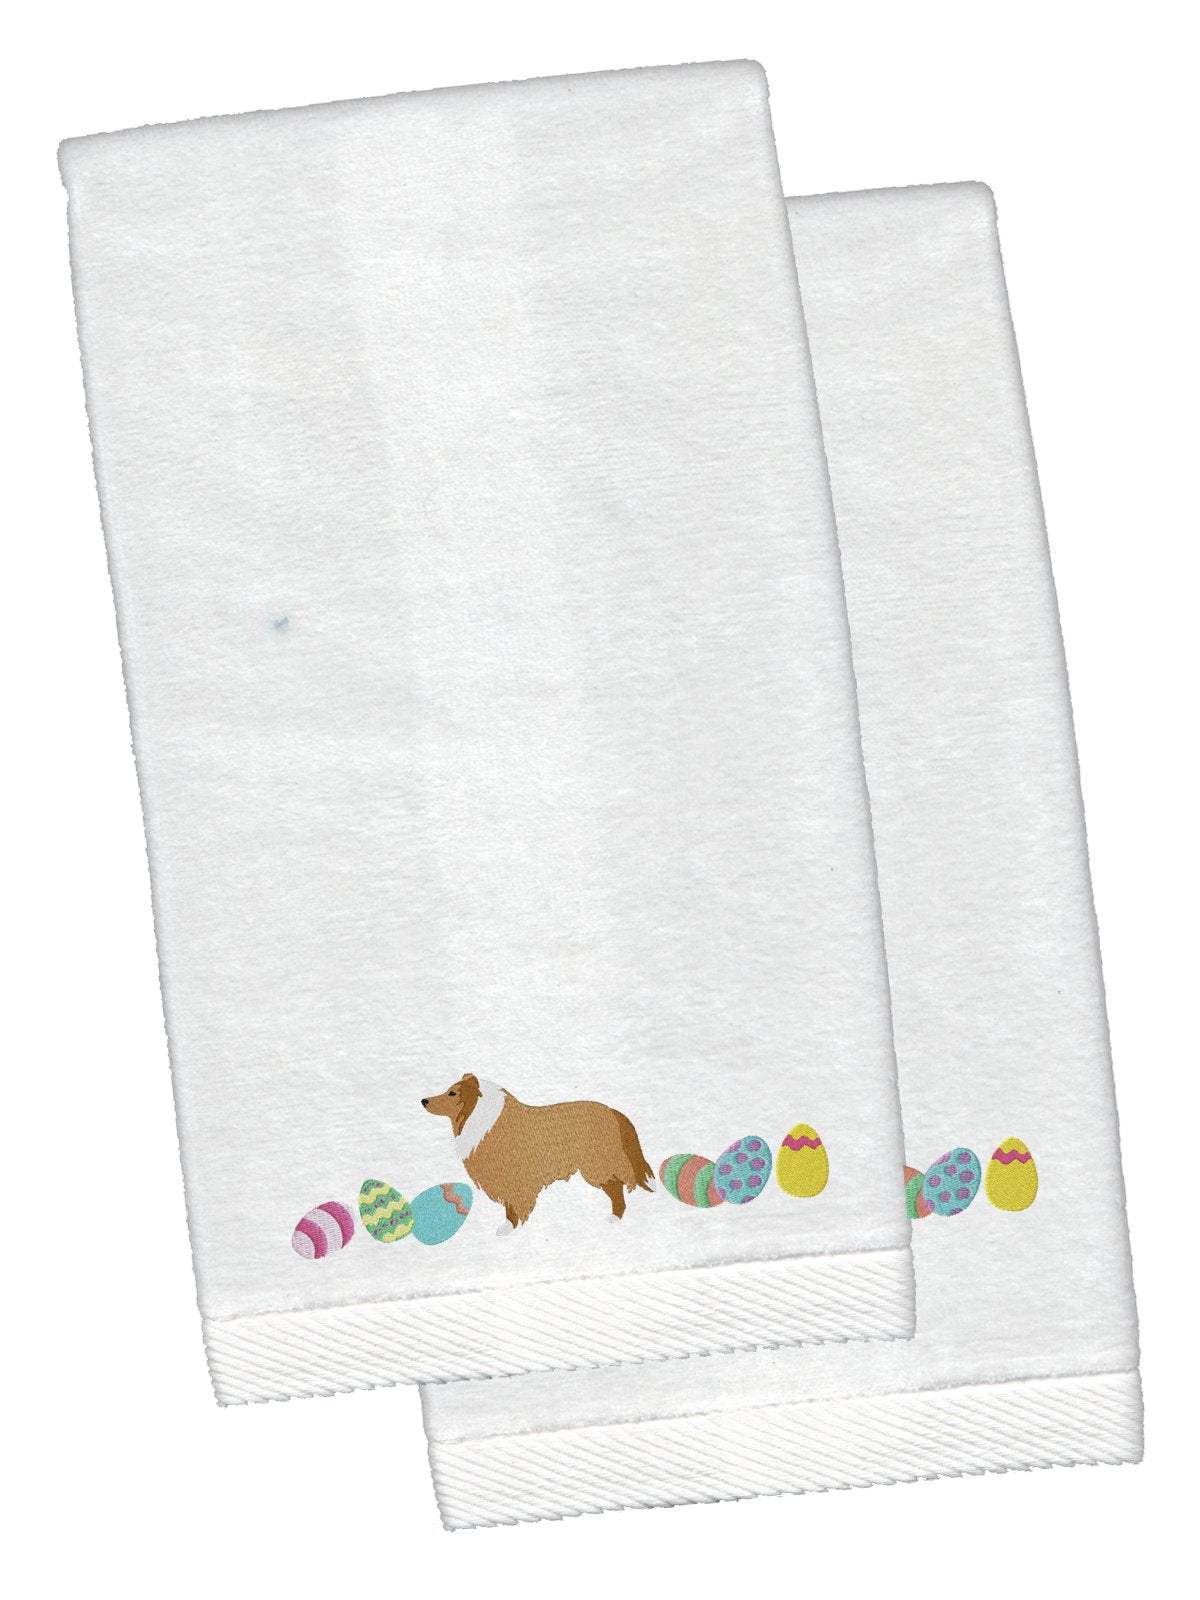 Collie Easter White Embroidered Plush Hand Towel Set of 2 CK1628KTEMB by Caroline's Treasures